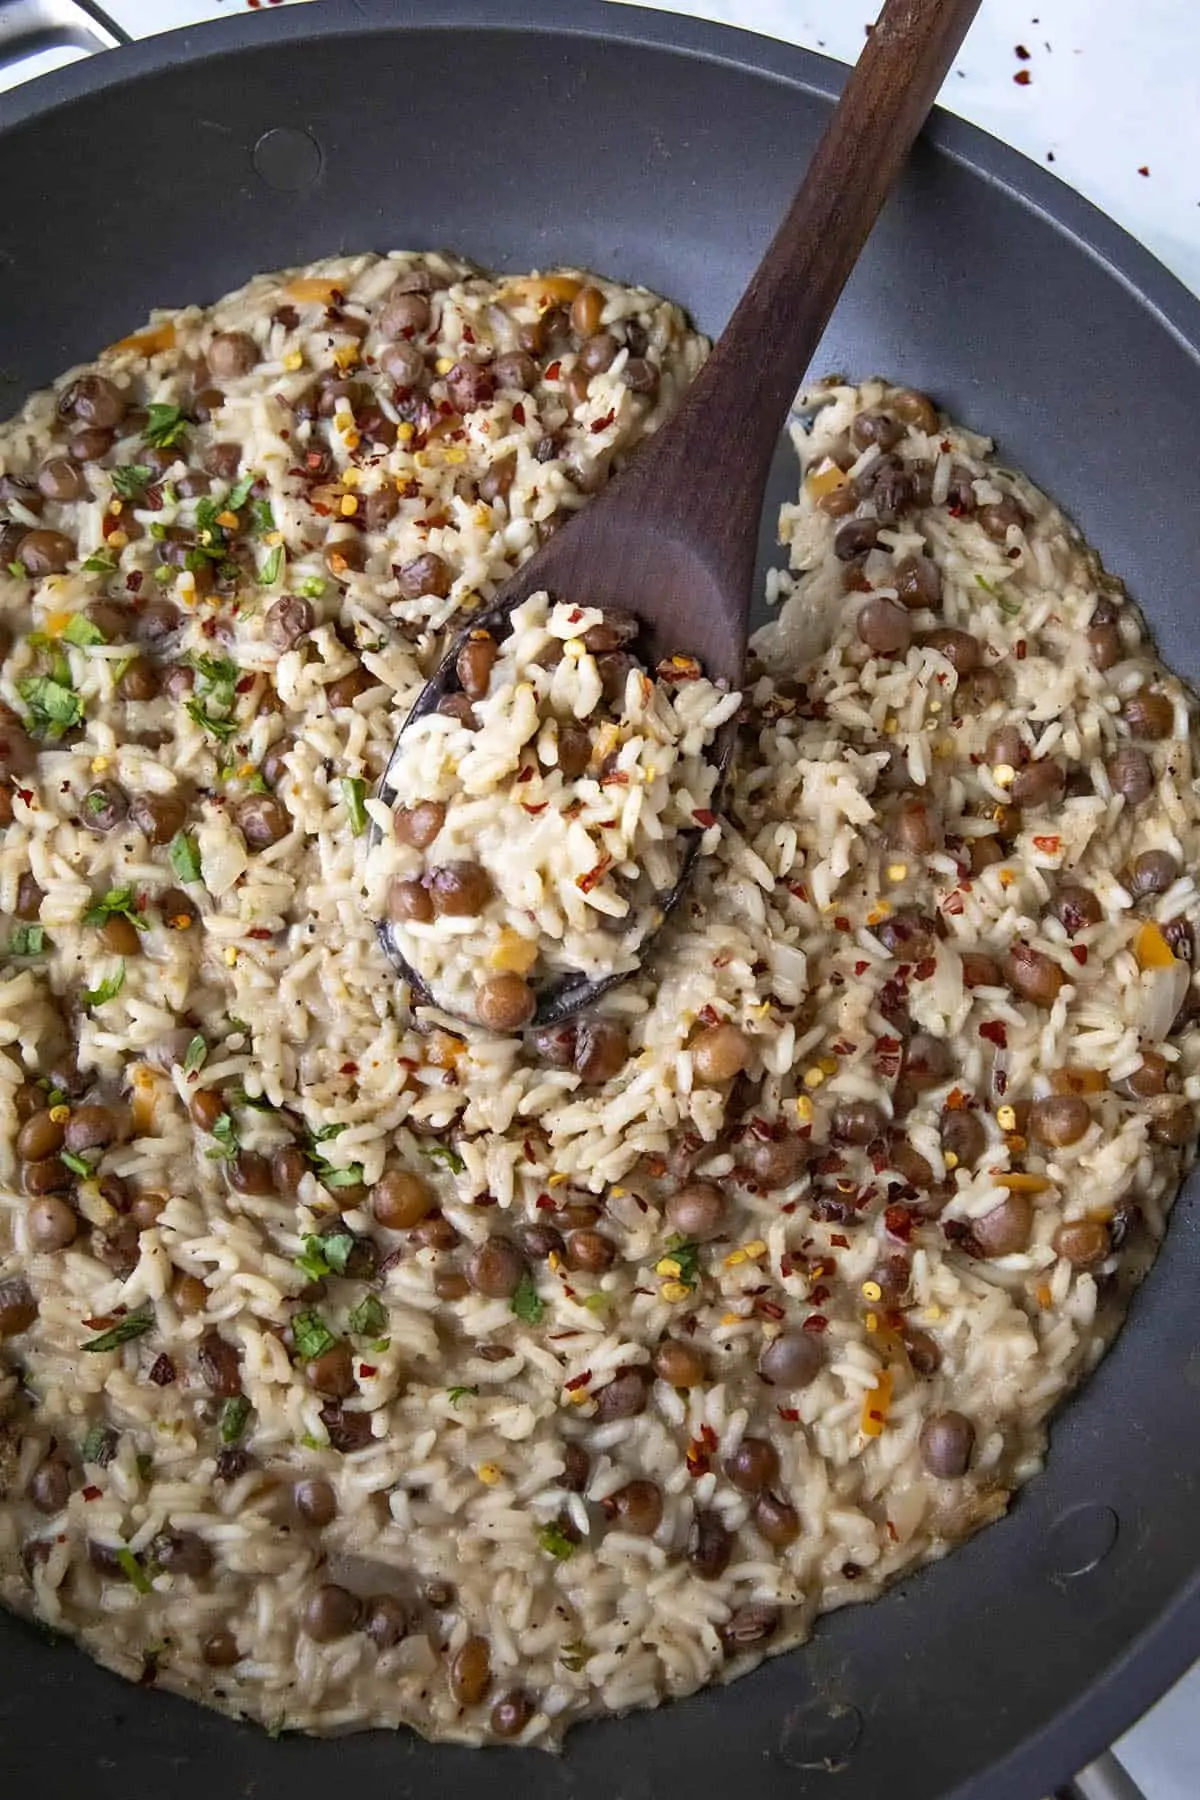 Serving Jamaican Rice and Peas from the pan